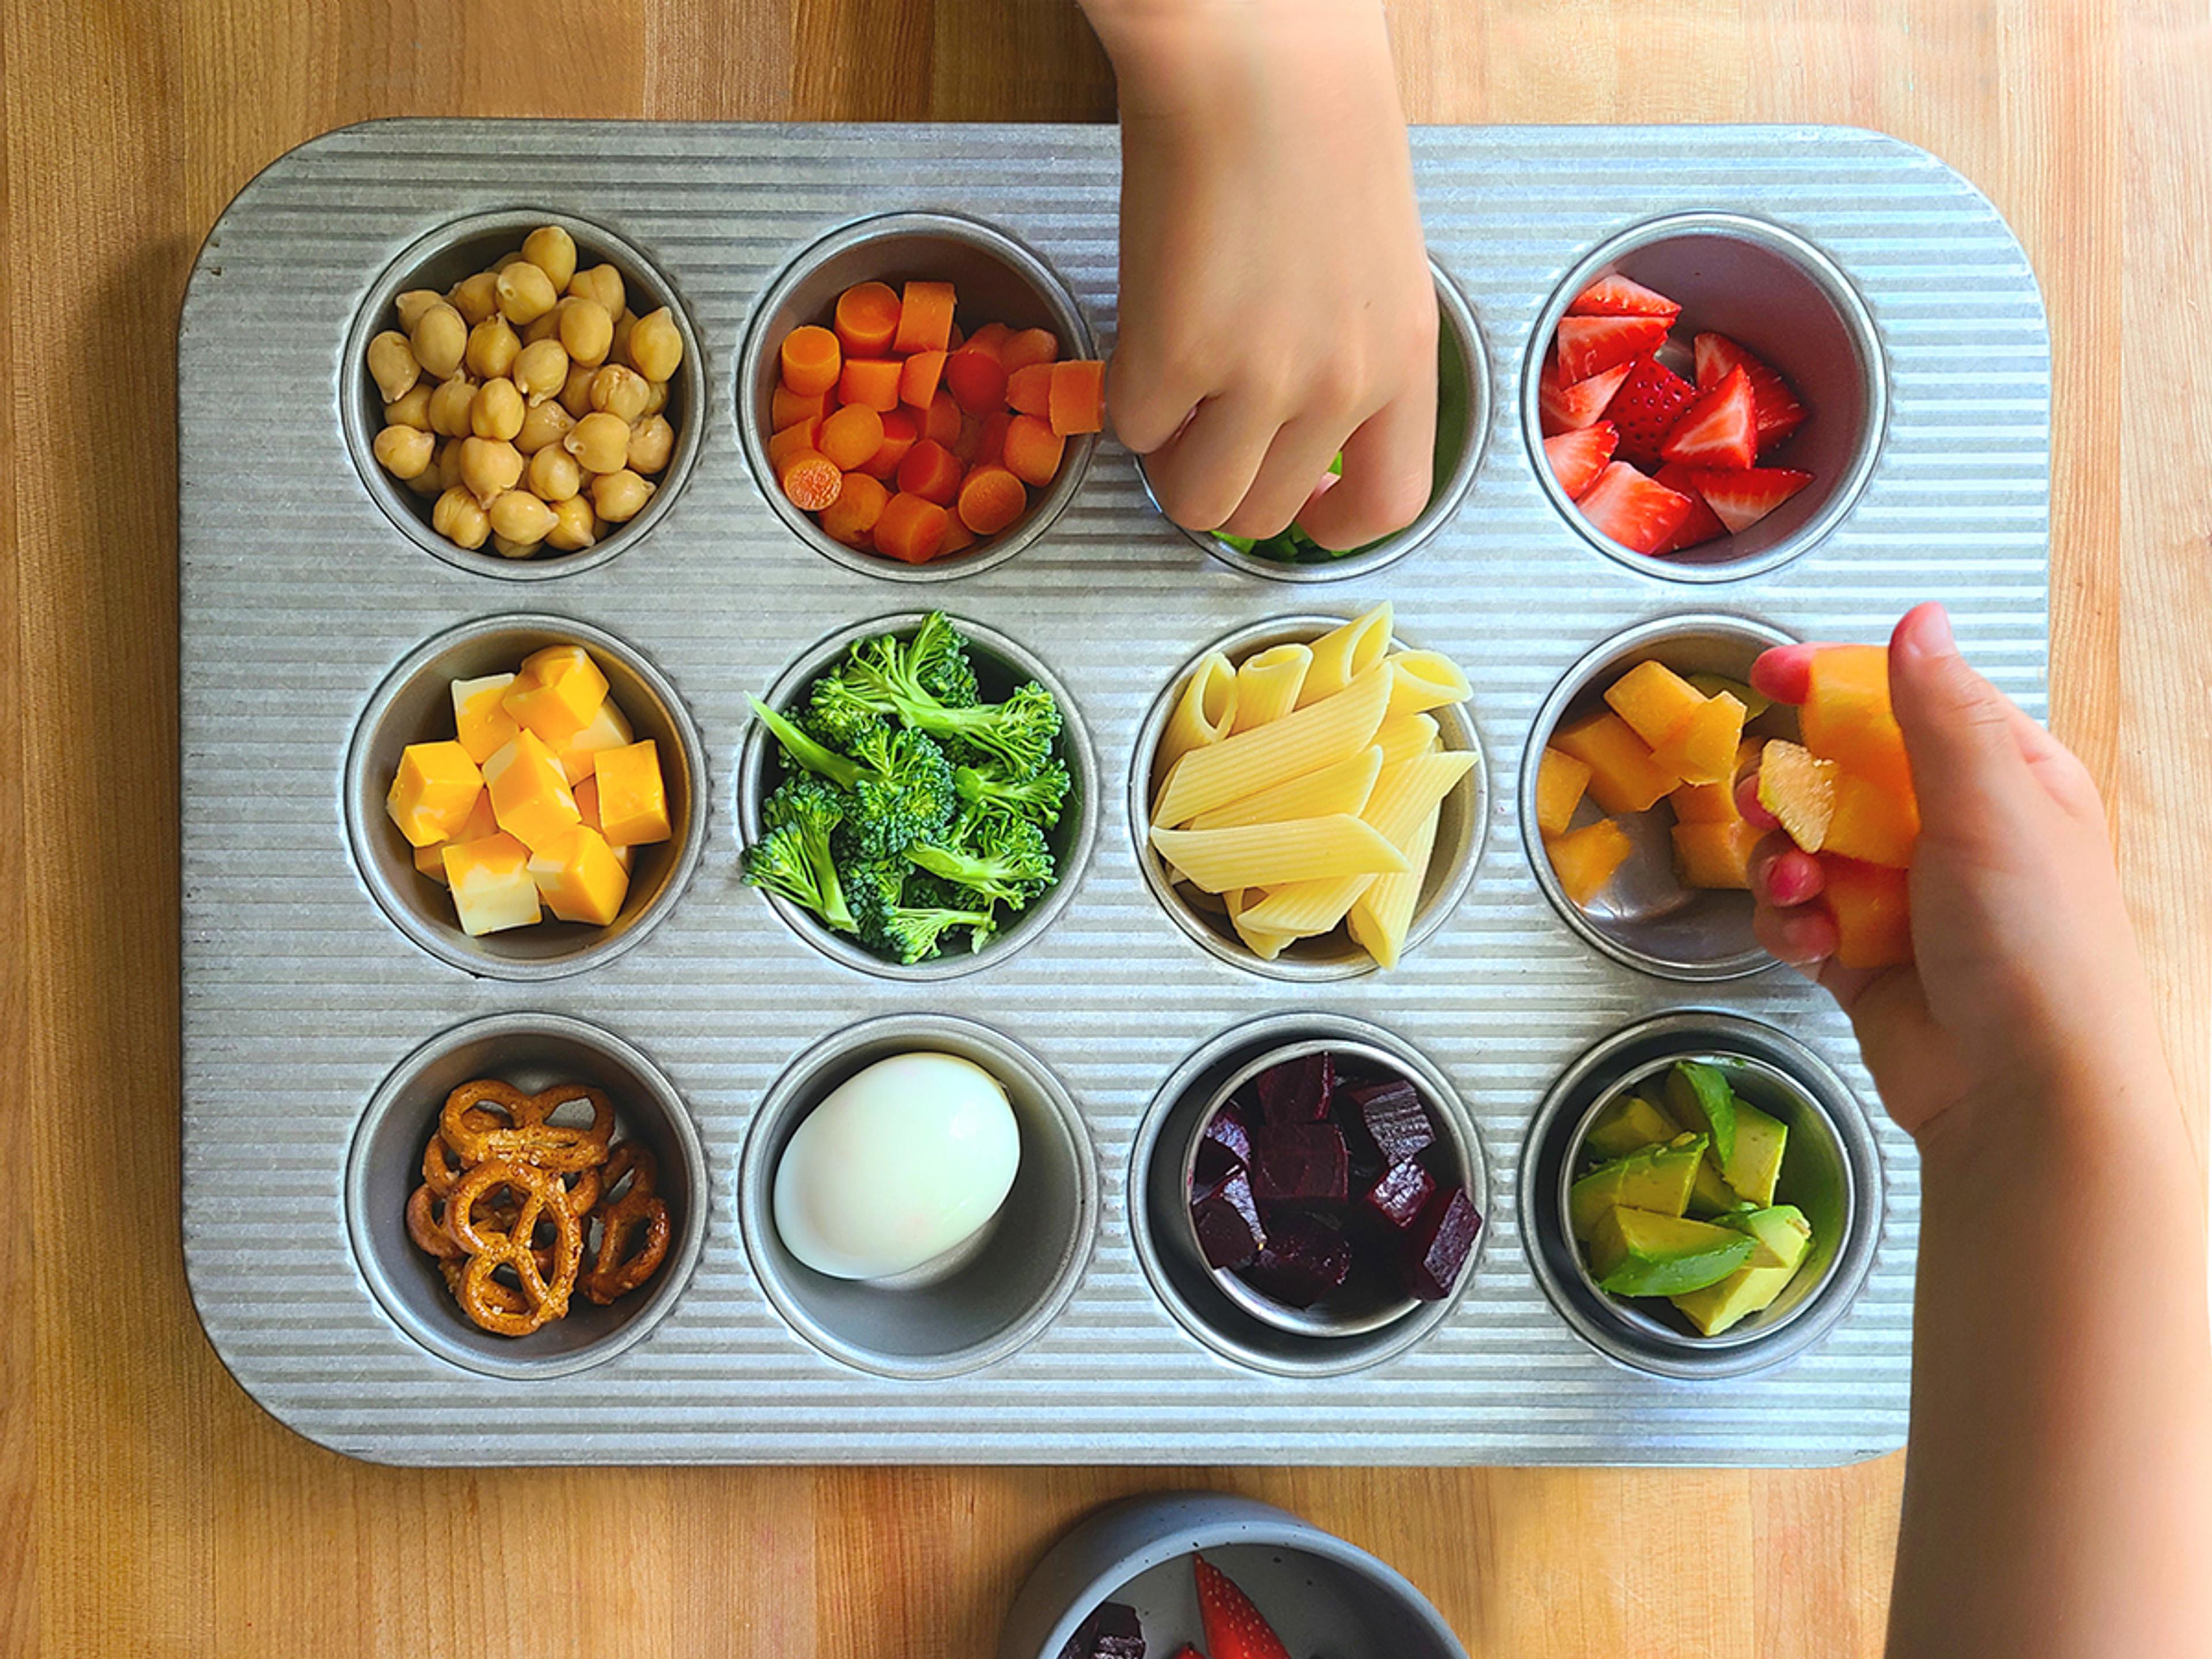  Two children’s hands fill each well of a muffin tin with a different colorful food.